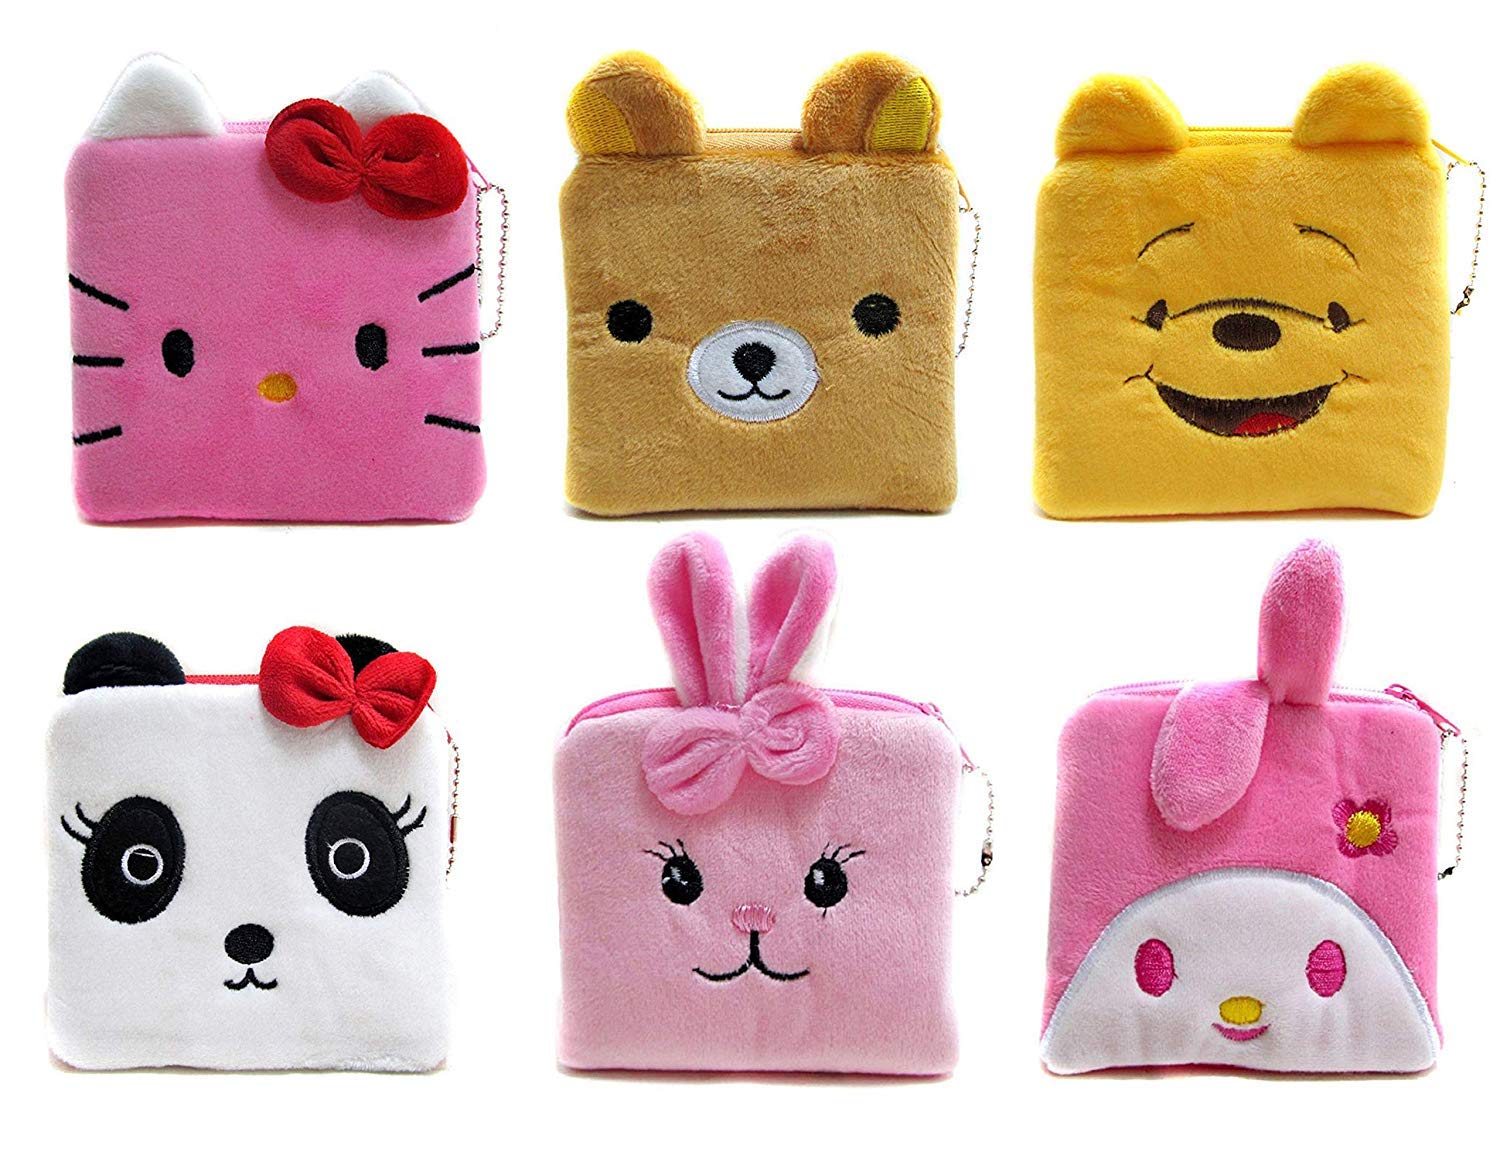 Buy KC Lovely Cute Soft Silicone Baby Kitty Cartoon Multi-Function Mini Coin  Purse for Earphone Lipsticks Headphone Pendrive Keys (Black) at Amazon.in